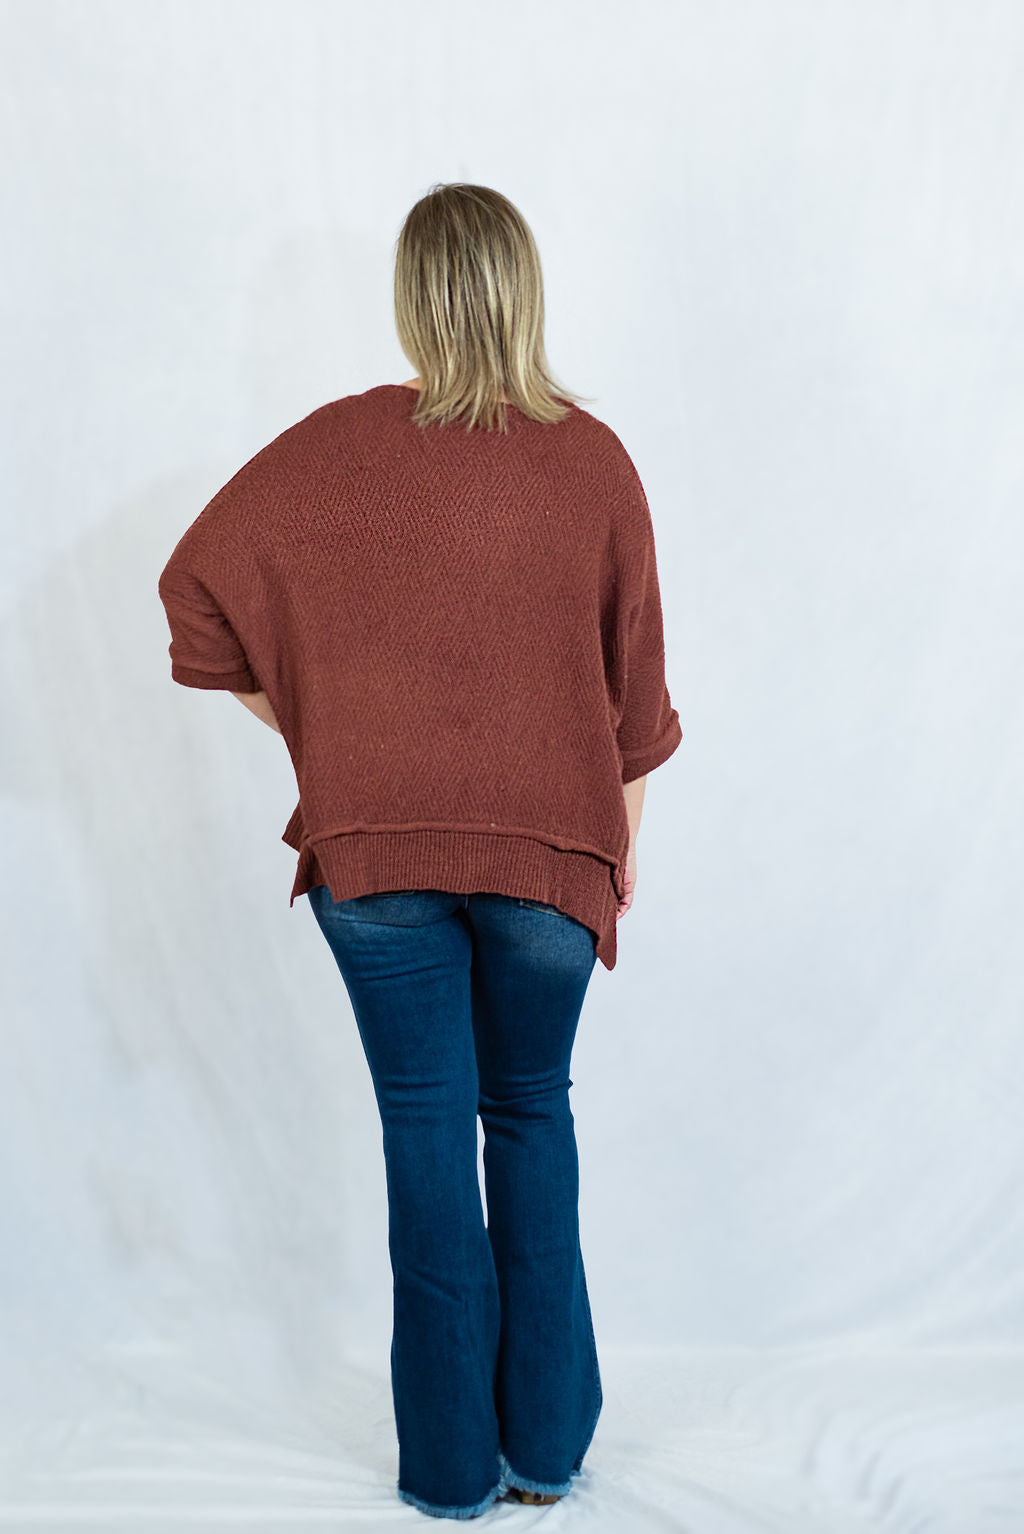 Asymmetrical Knit Top by Entro Clothing